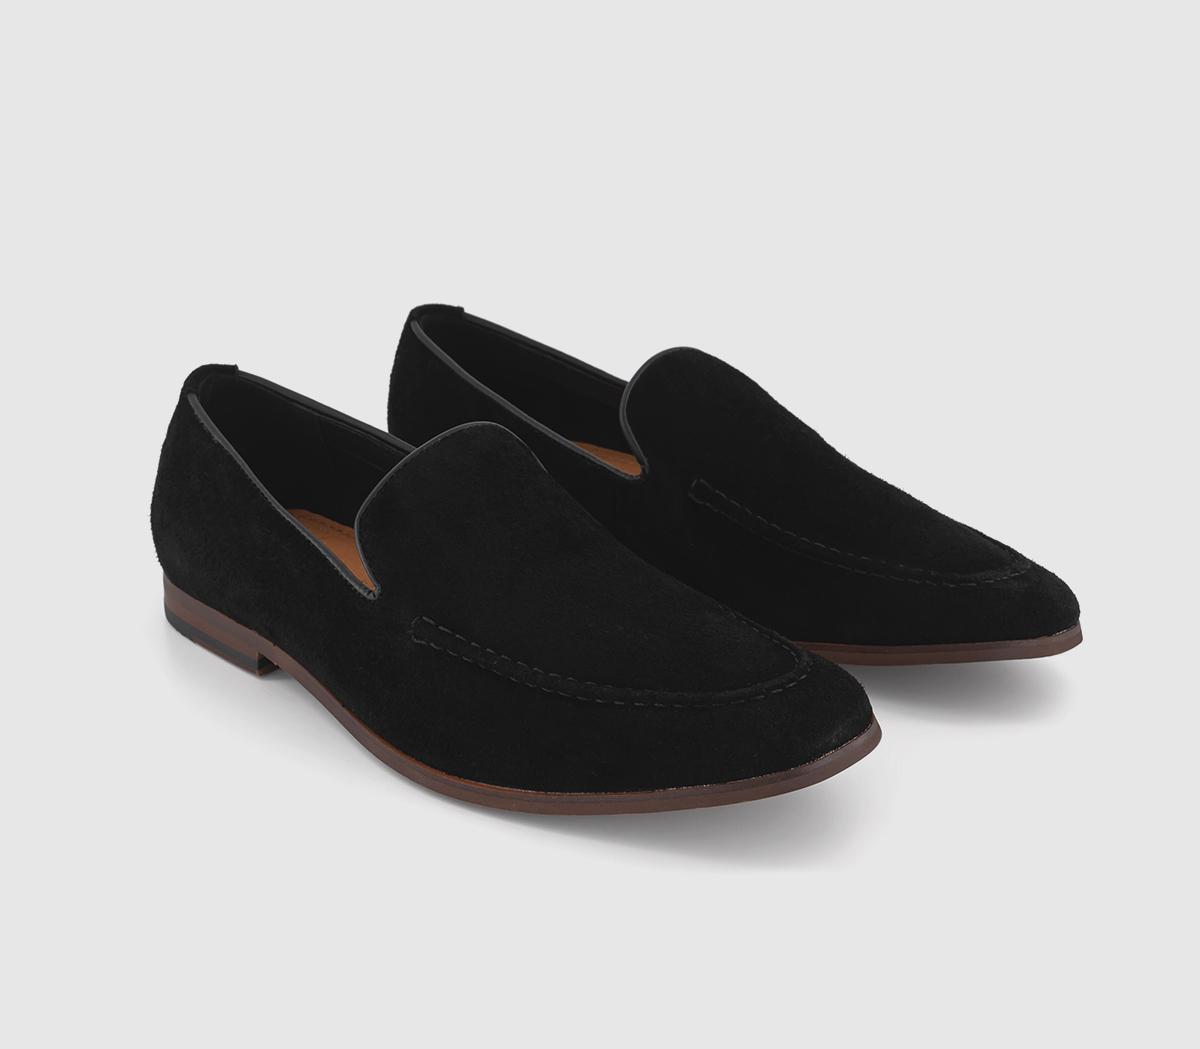 OFFICE Mens Cody Slip On Loafers Black Suede, 11